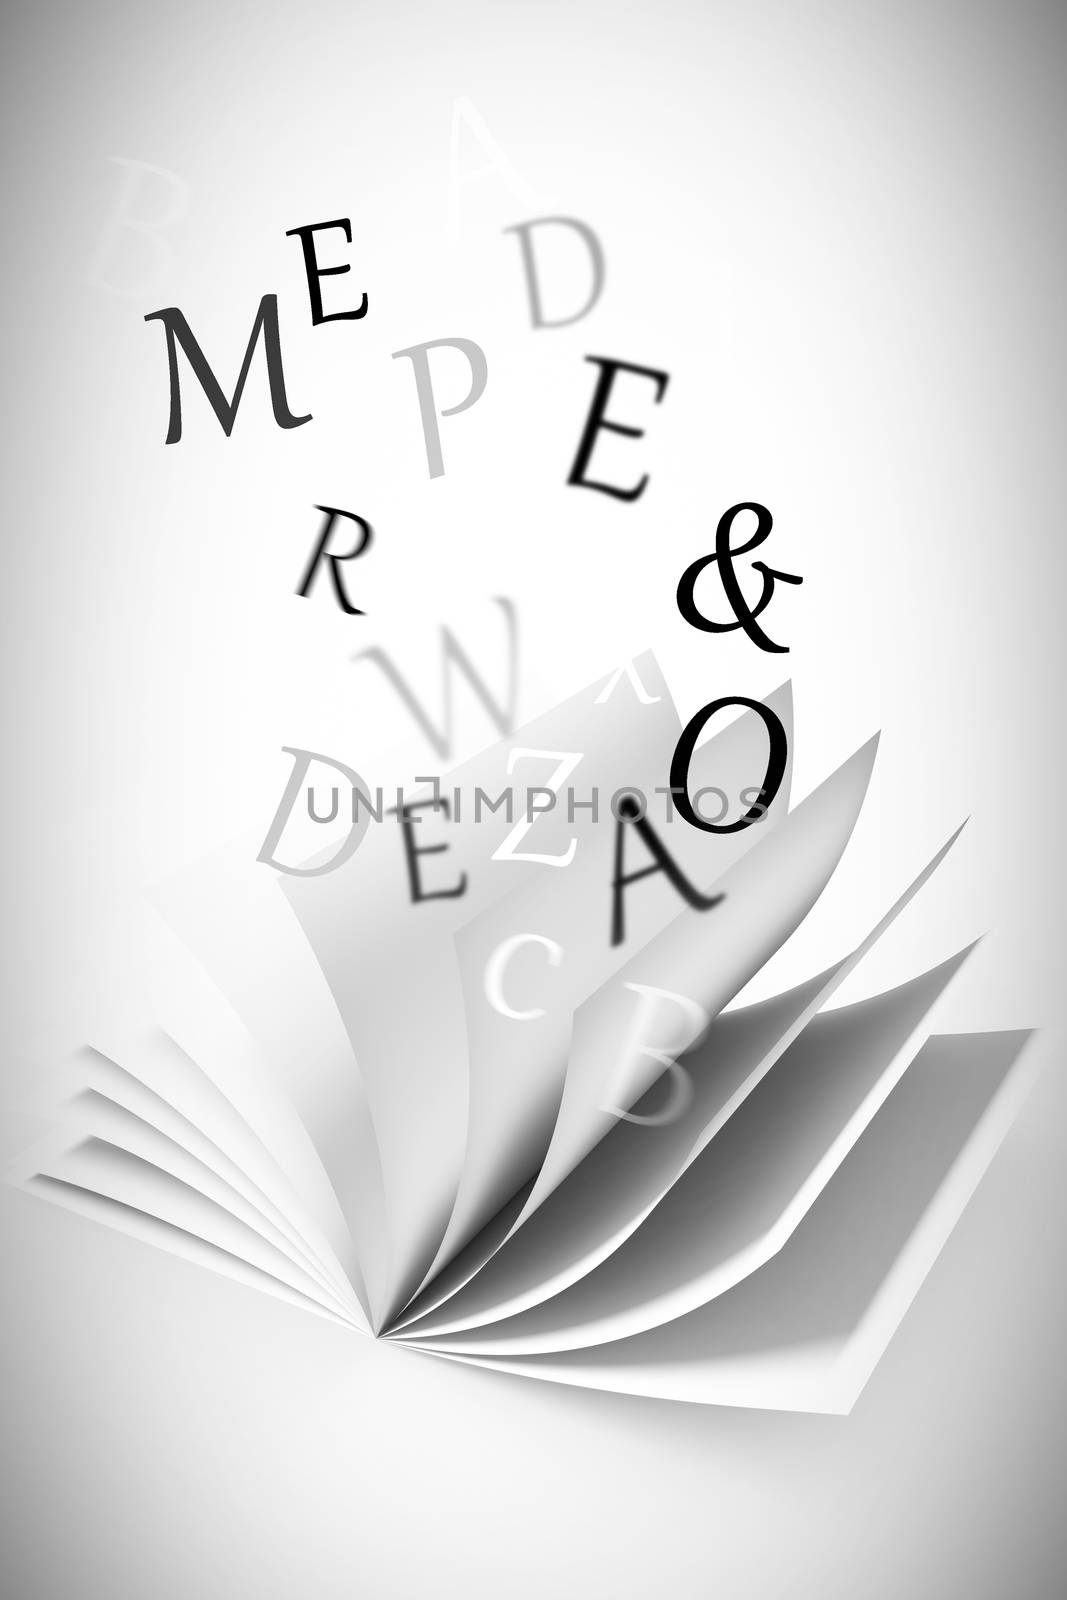 Composite image of letters by Wavebreakmedia